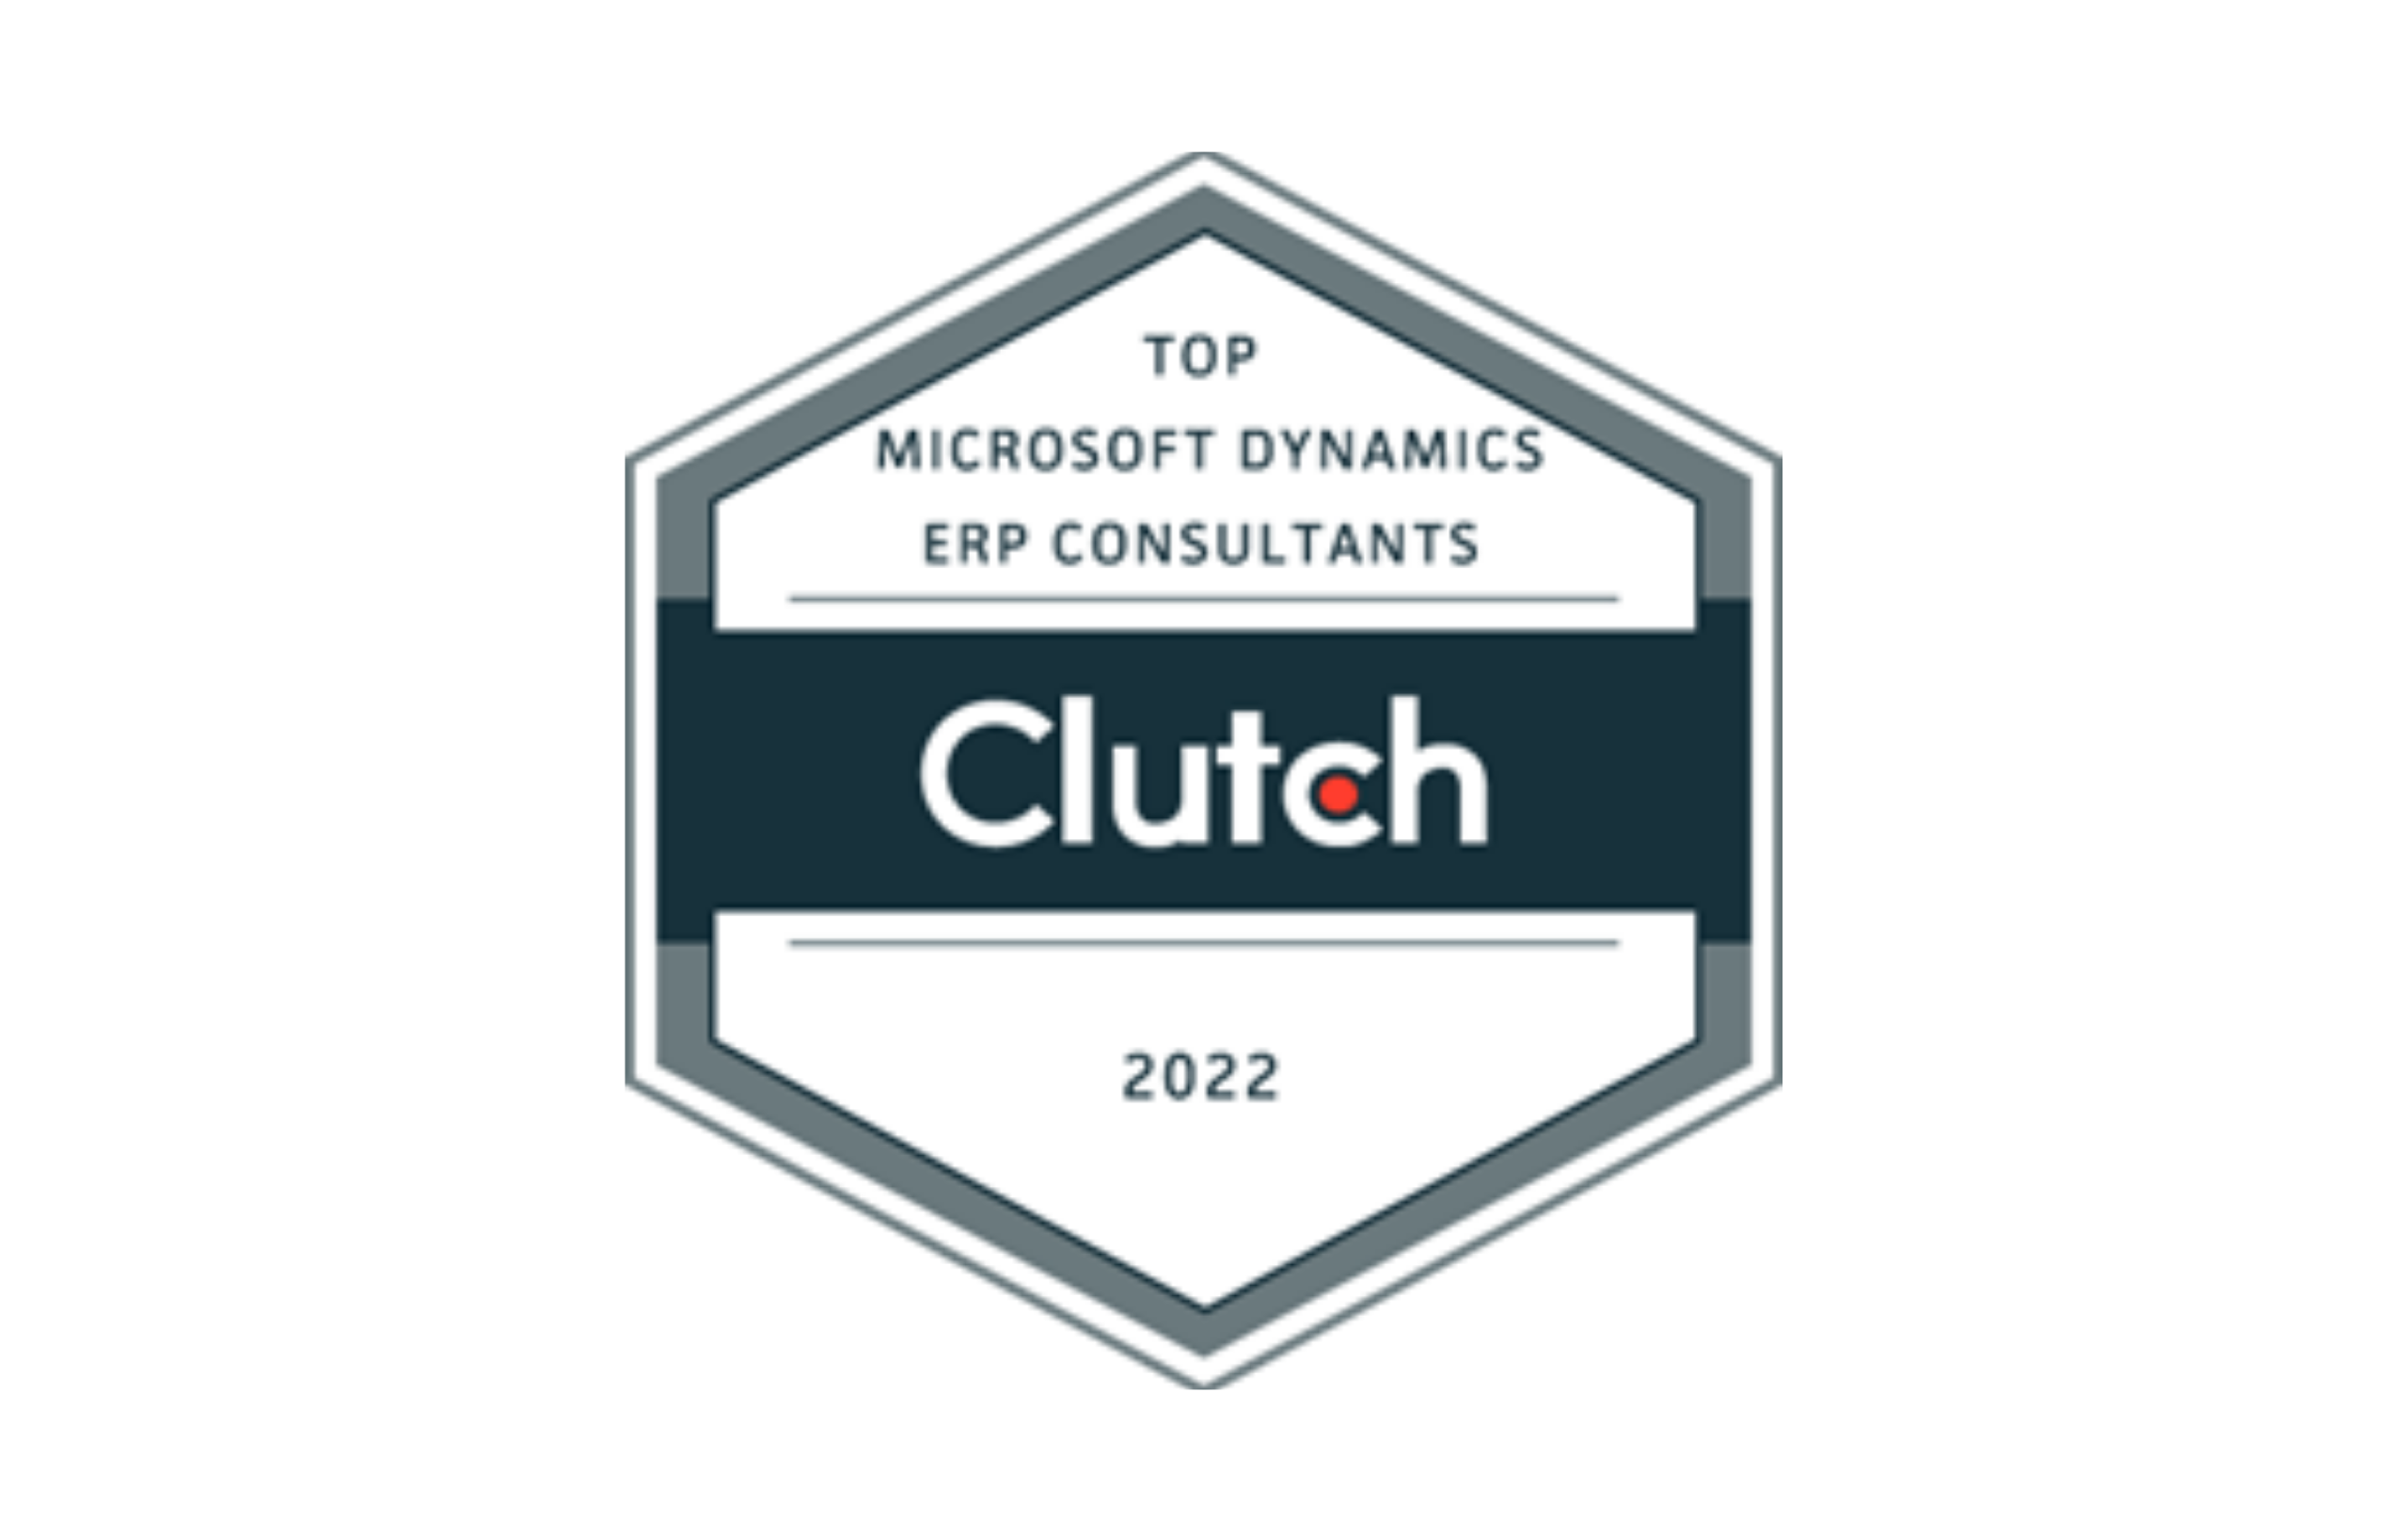 Clutch Names Digicode Among The Leading Microsoft Dynamics ERP Consulting For 2022